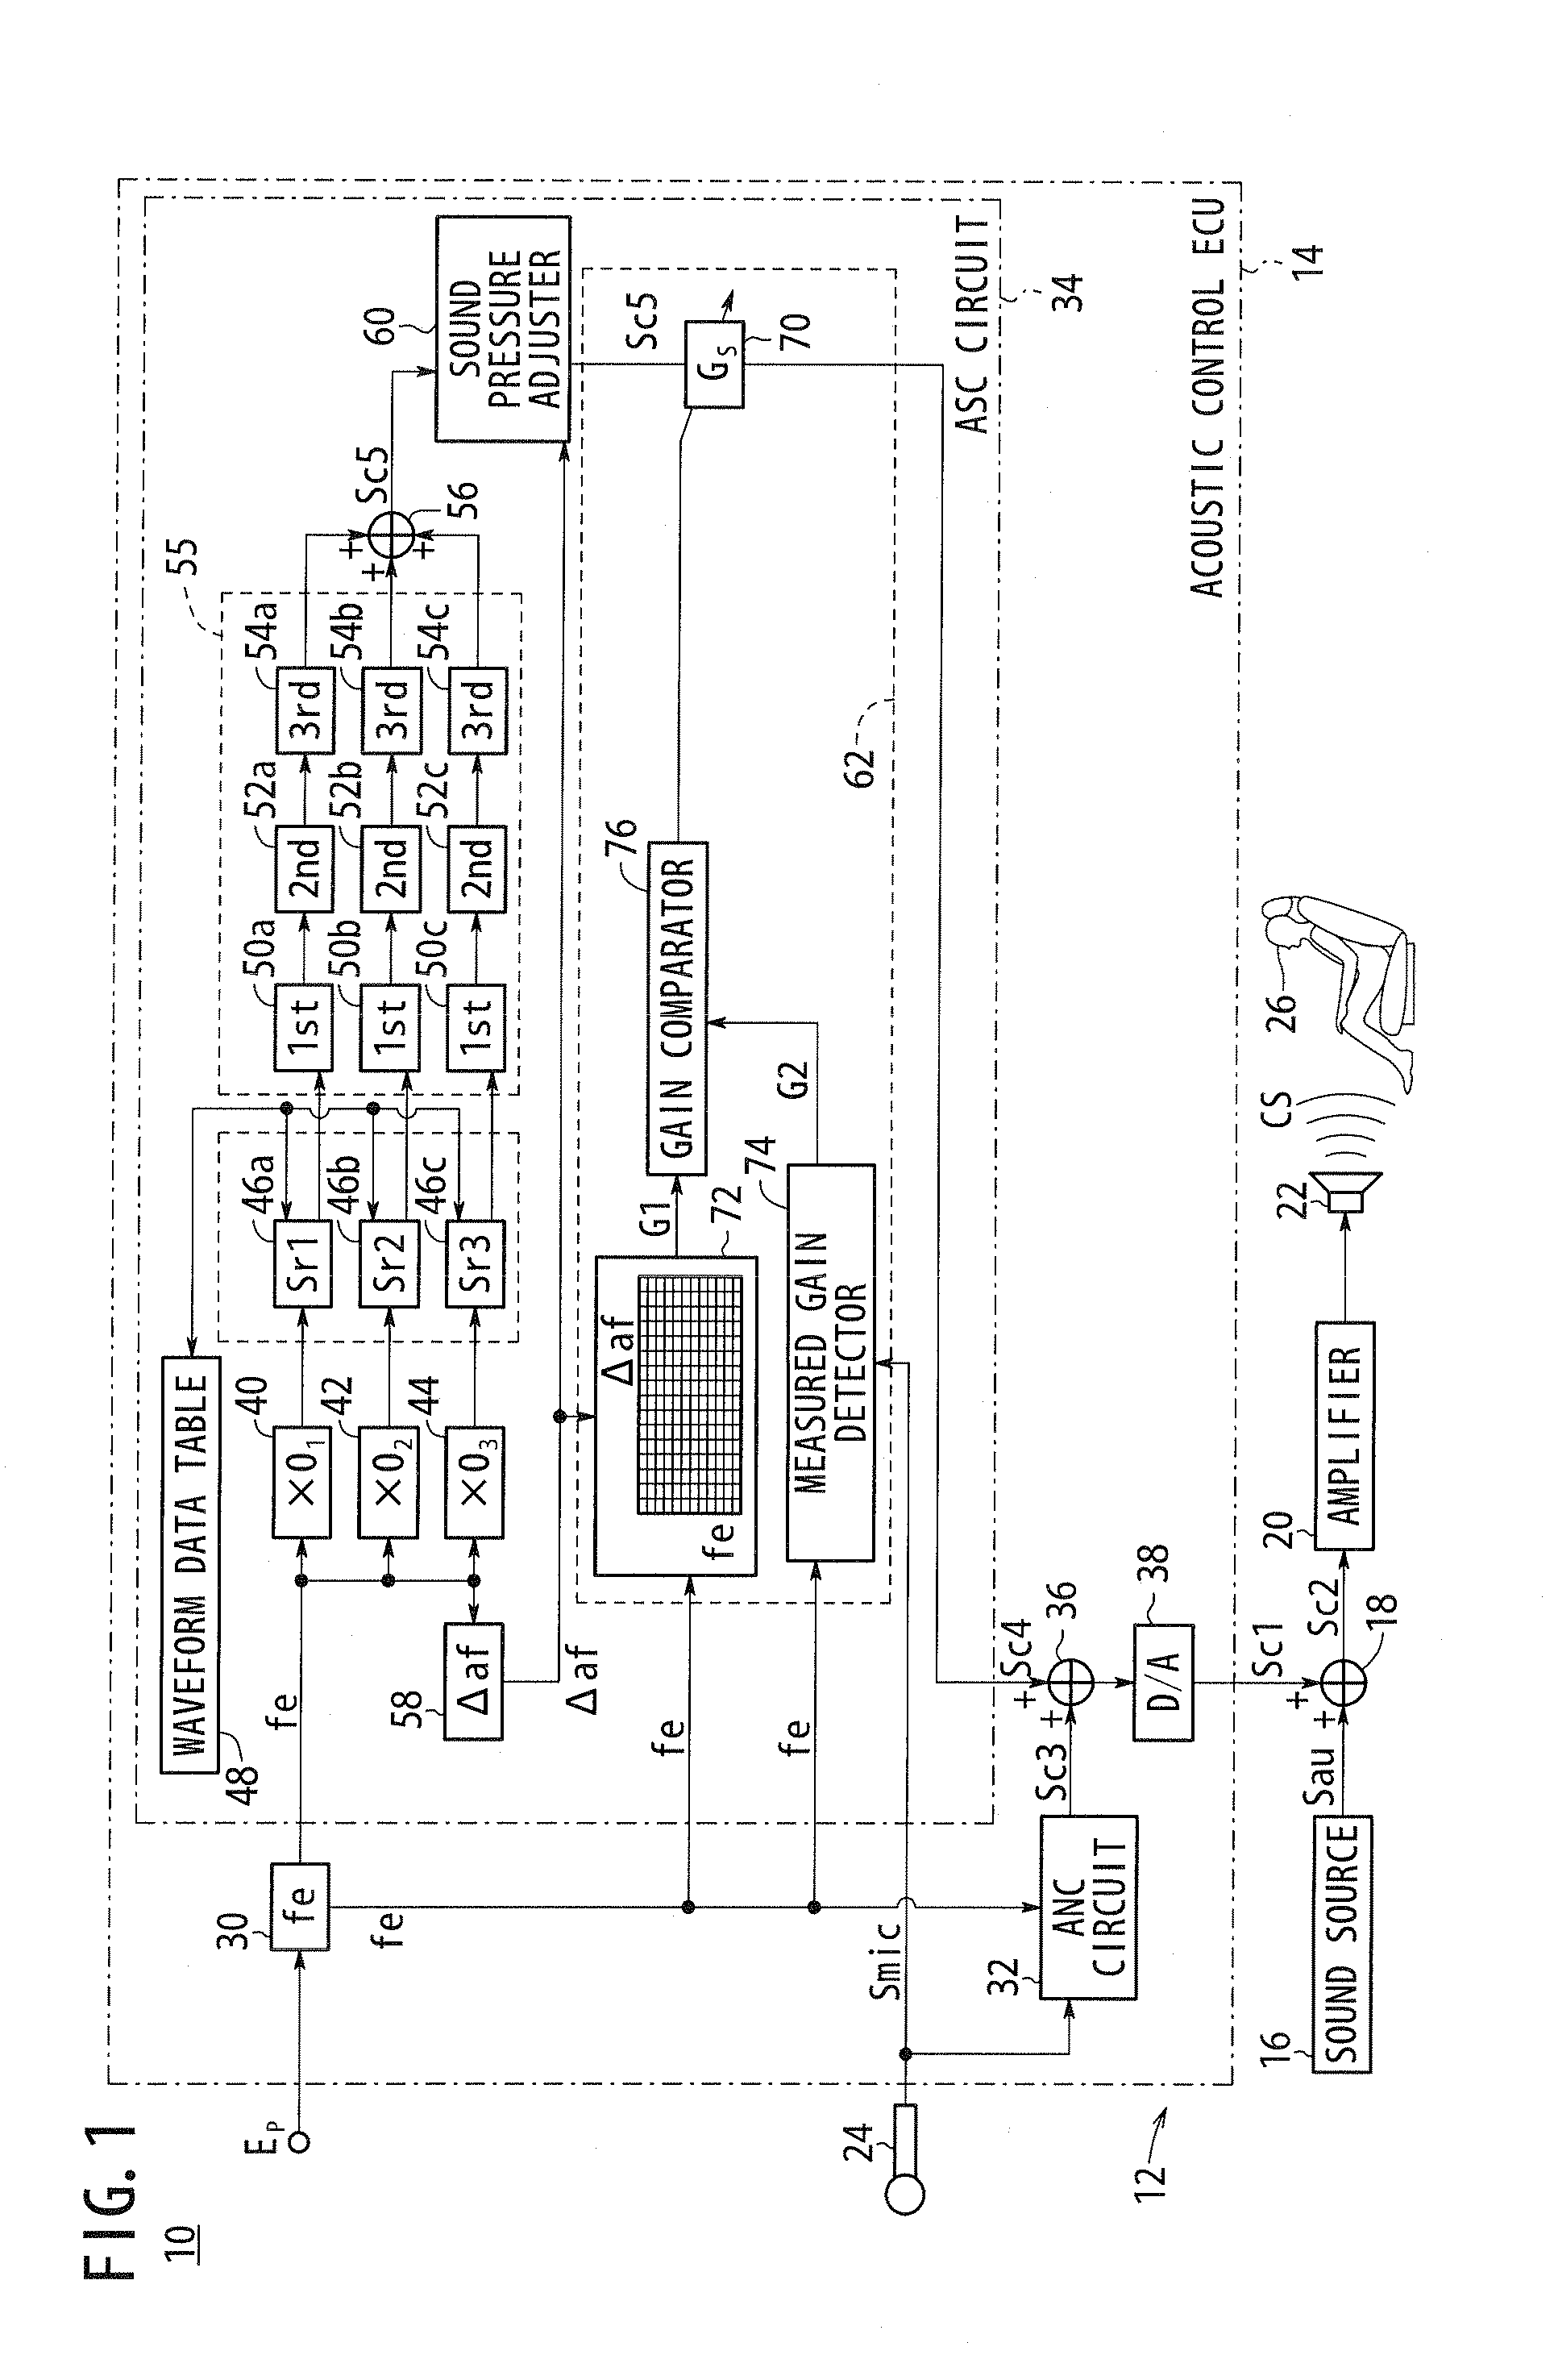 Sound effect generating device